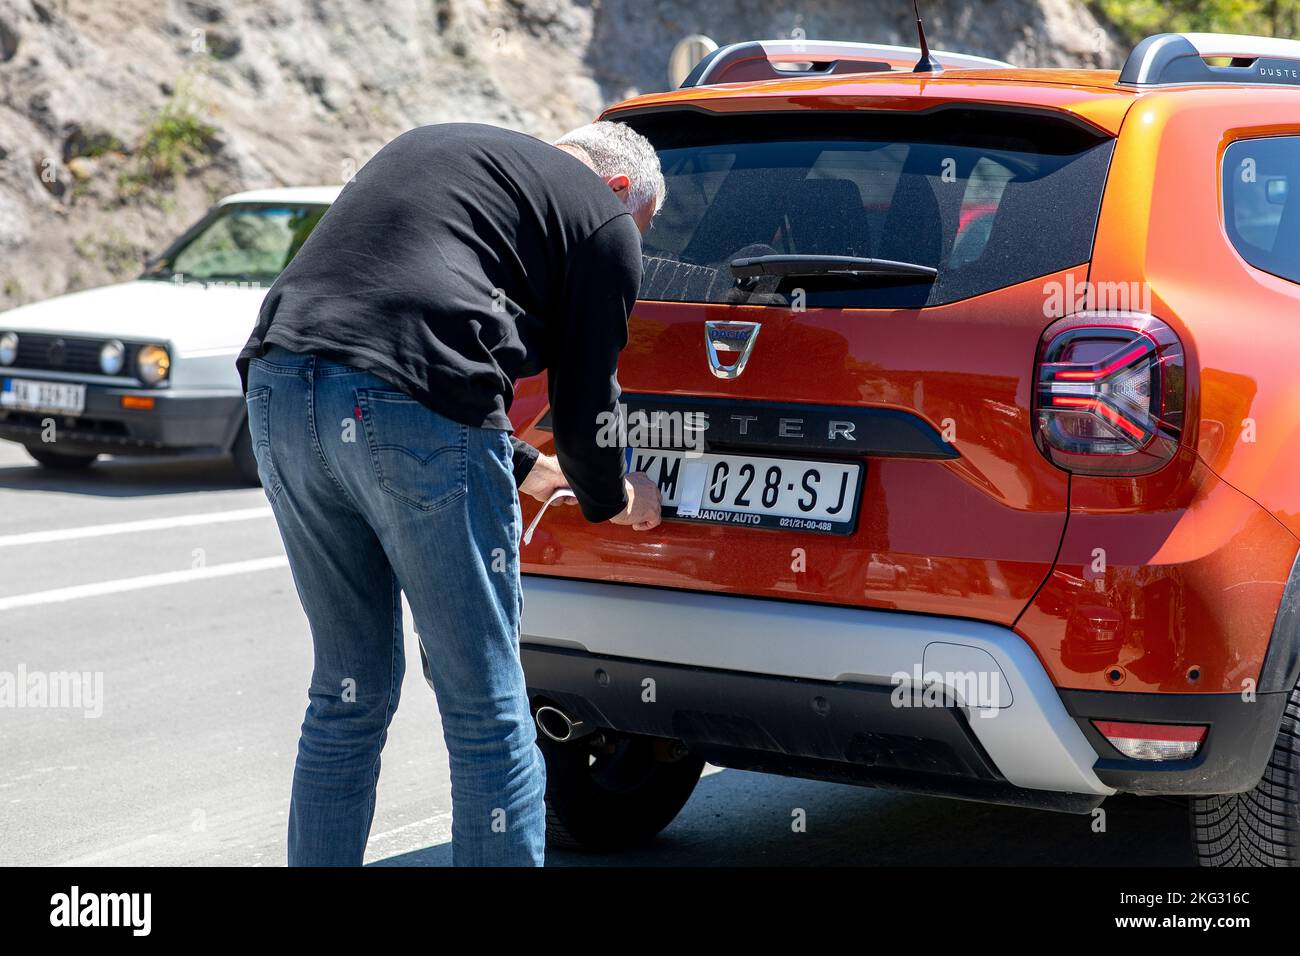 Serbia-Kosovo border crossing. Driver complying with number plate regulations. Stock Photo